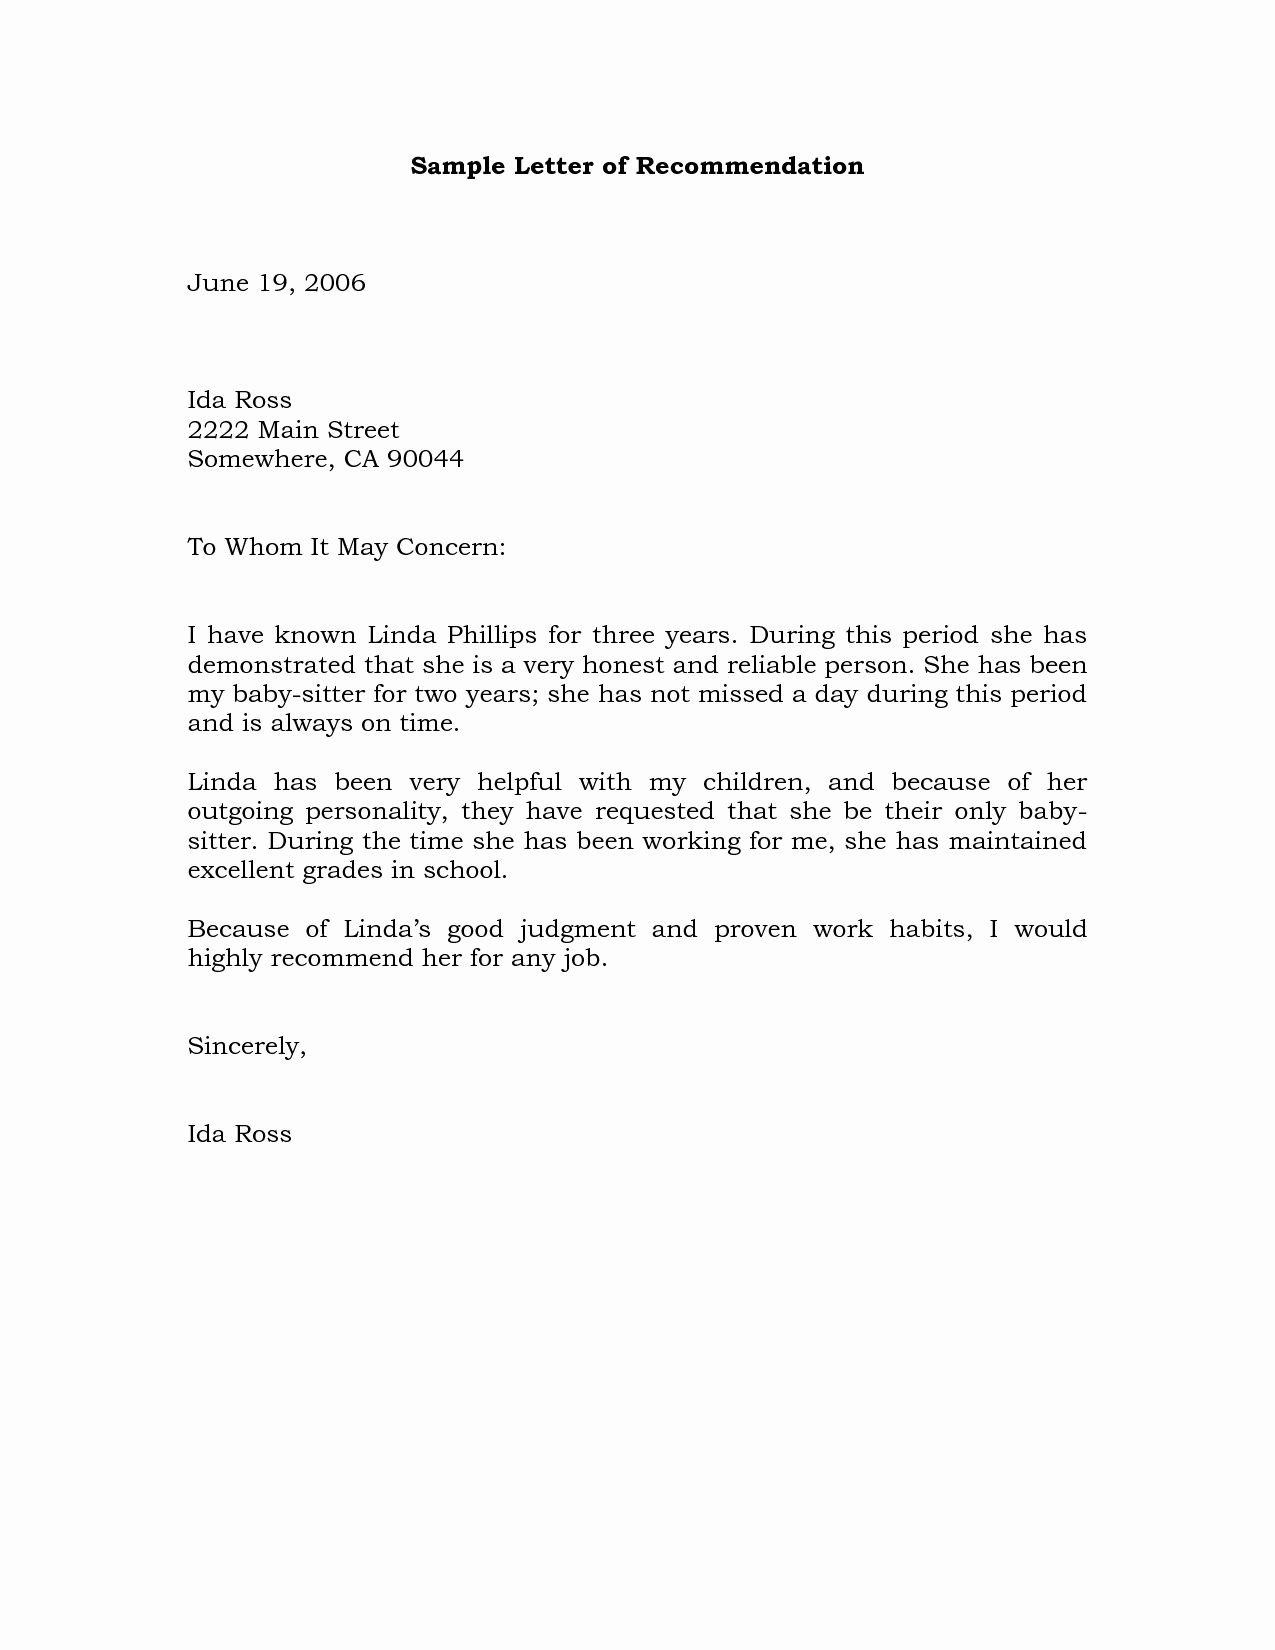 Personal Recommendation Letter Sample Lovely Sample Re Mendation Letter Example